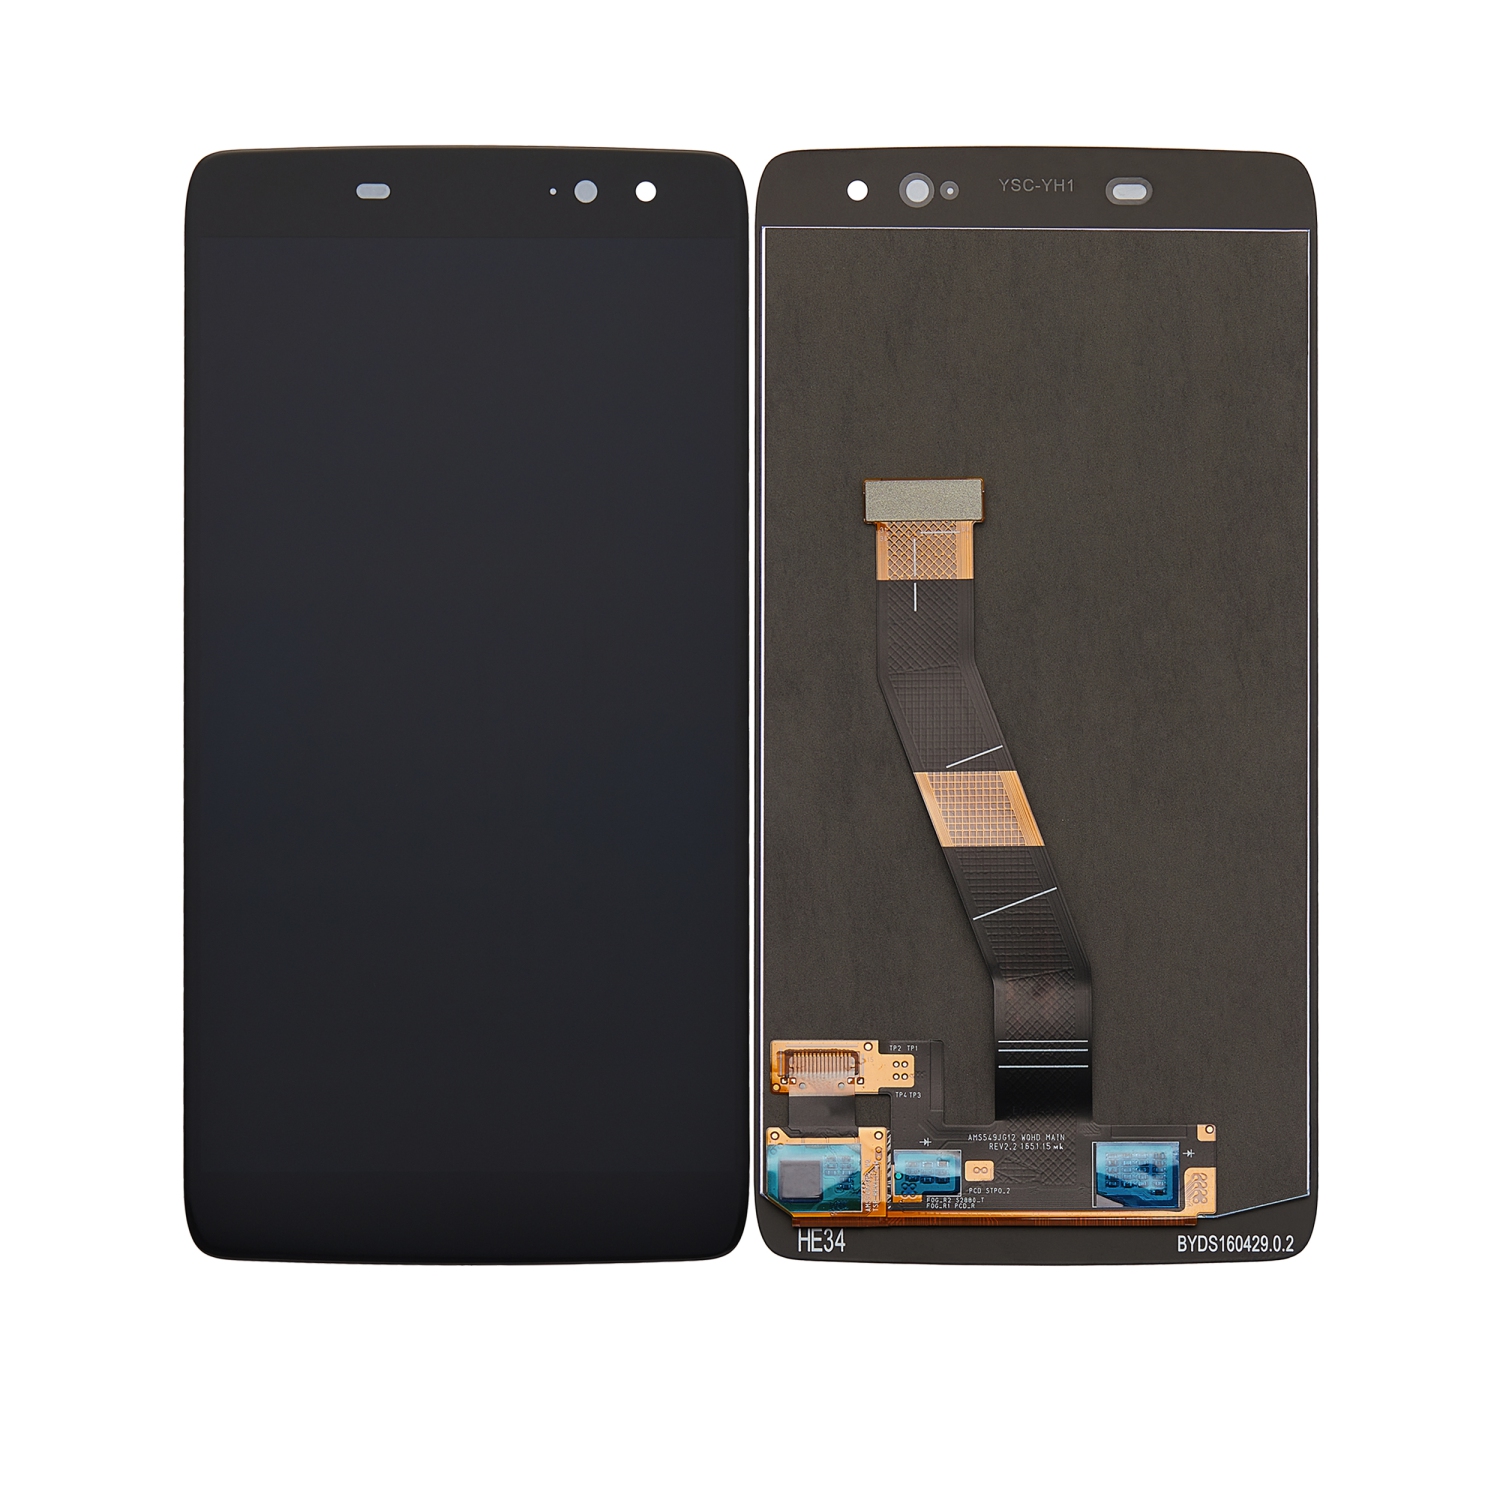 Replacement OLED Assembly Without Frame Compatible For Alcatel Idol 4S (607O / 2016) (Refurbished) (Black)